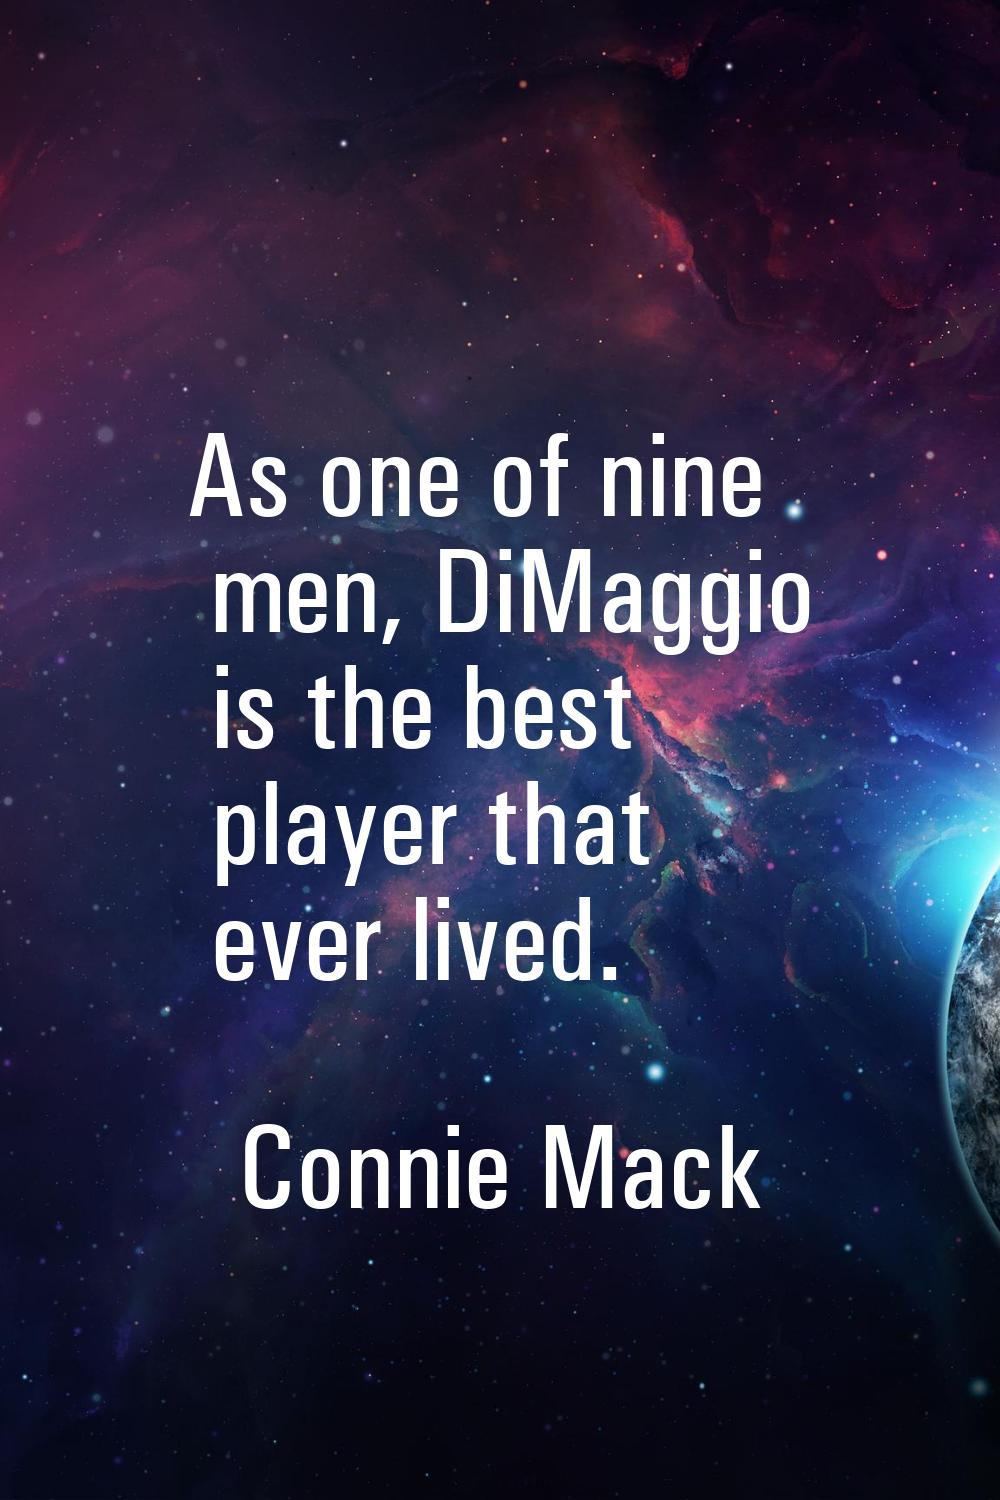 As one of nine men, DiMaggio is the best player that ever lived.